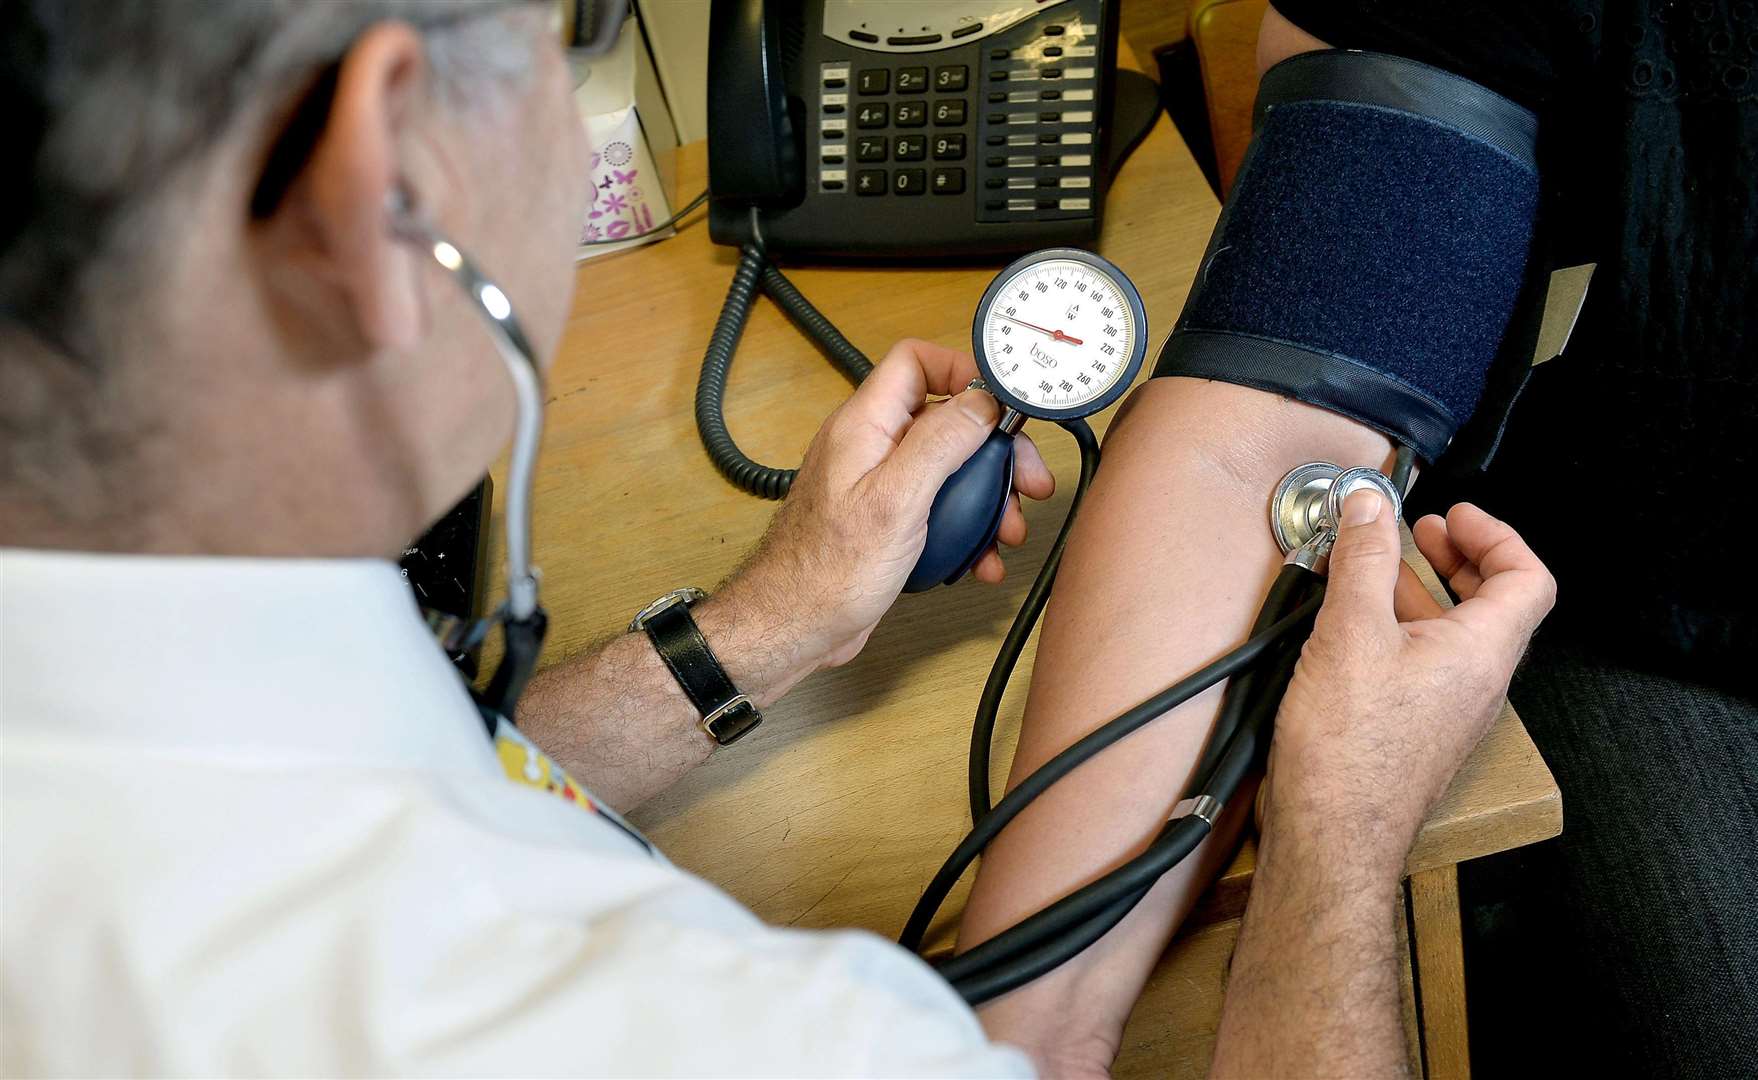 More than a quarter of patients in Dartford, Gravesham and Swanley waiting a week to see their GPPhoto credit should read: Anthony Devlin/PA Wire (3779197)